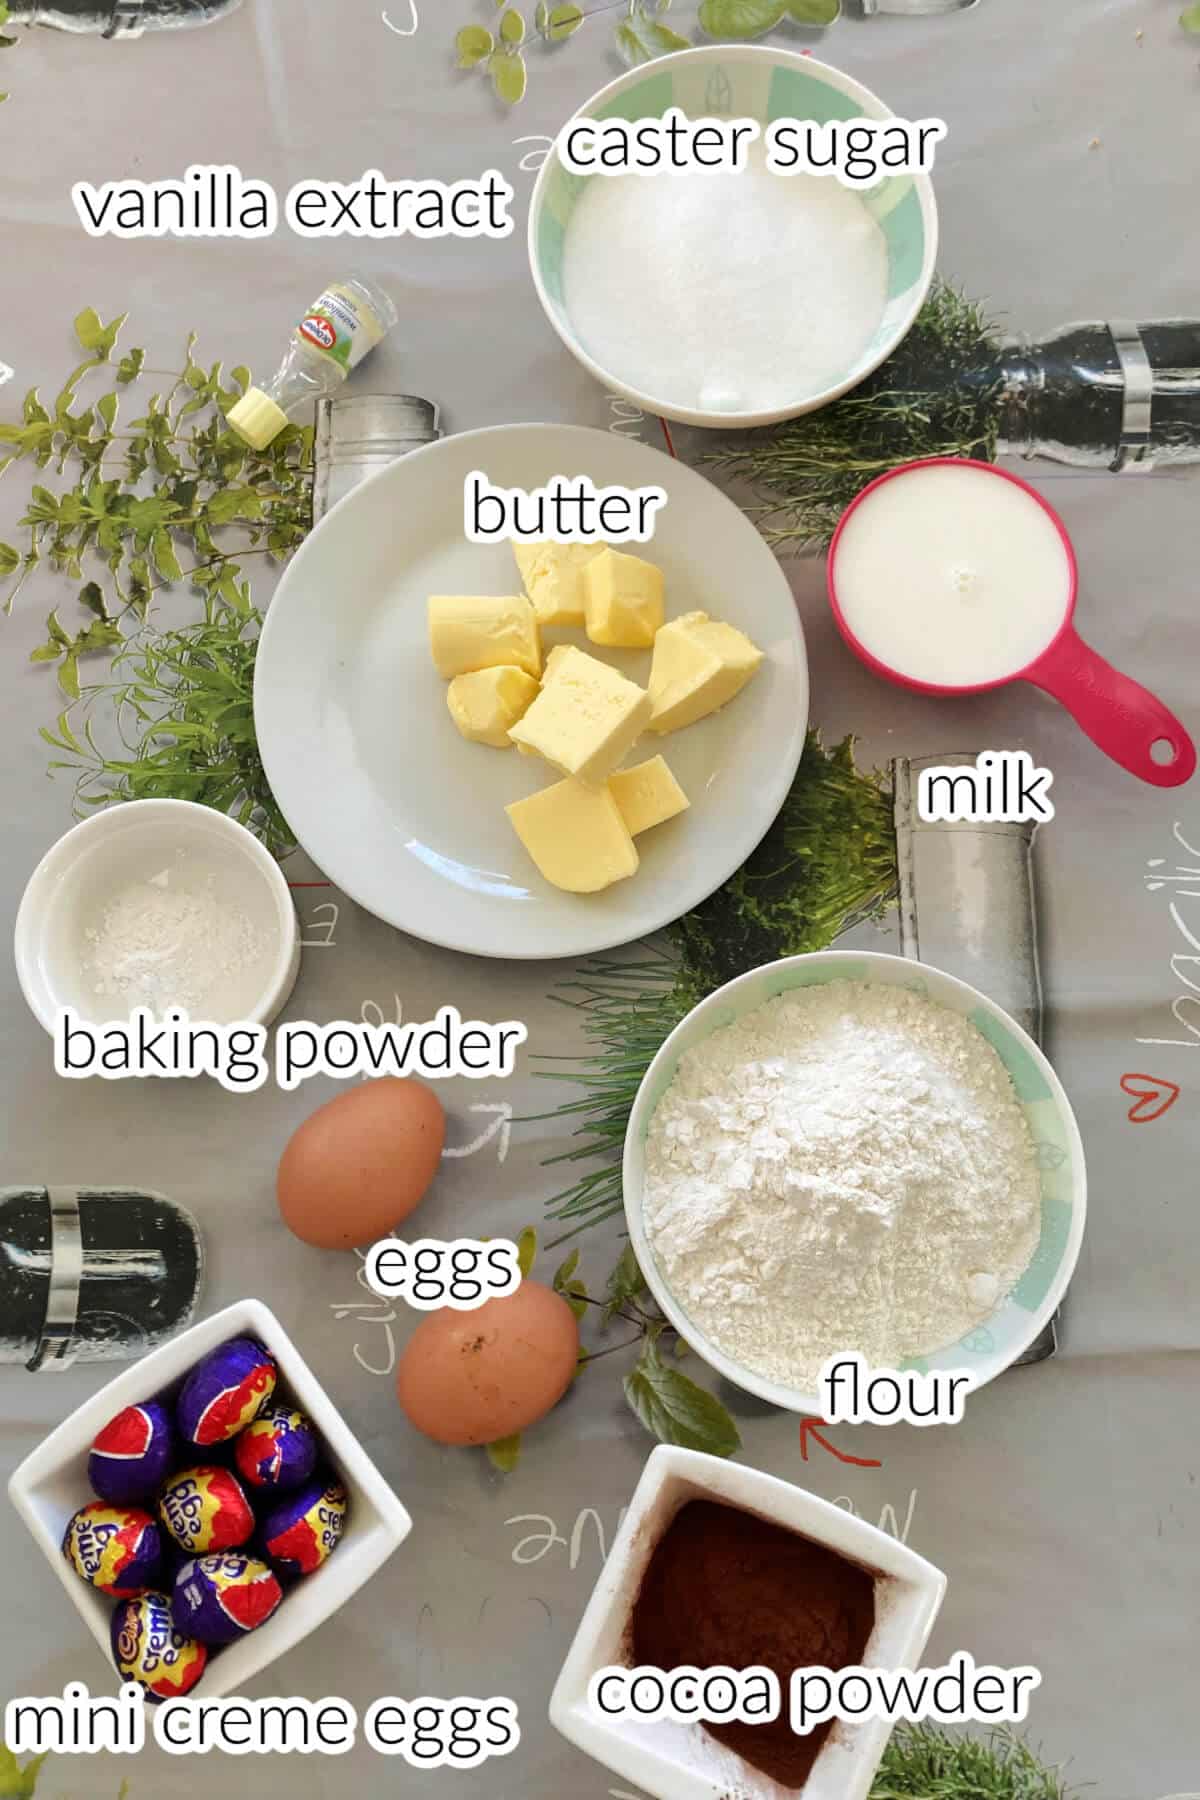 Ingredients needed to make chocolate sponge for cupcakes.